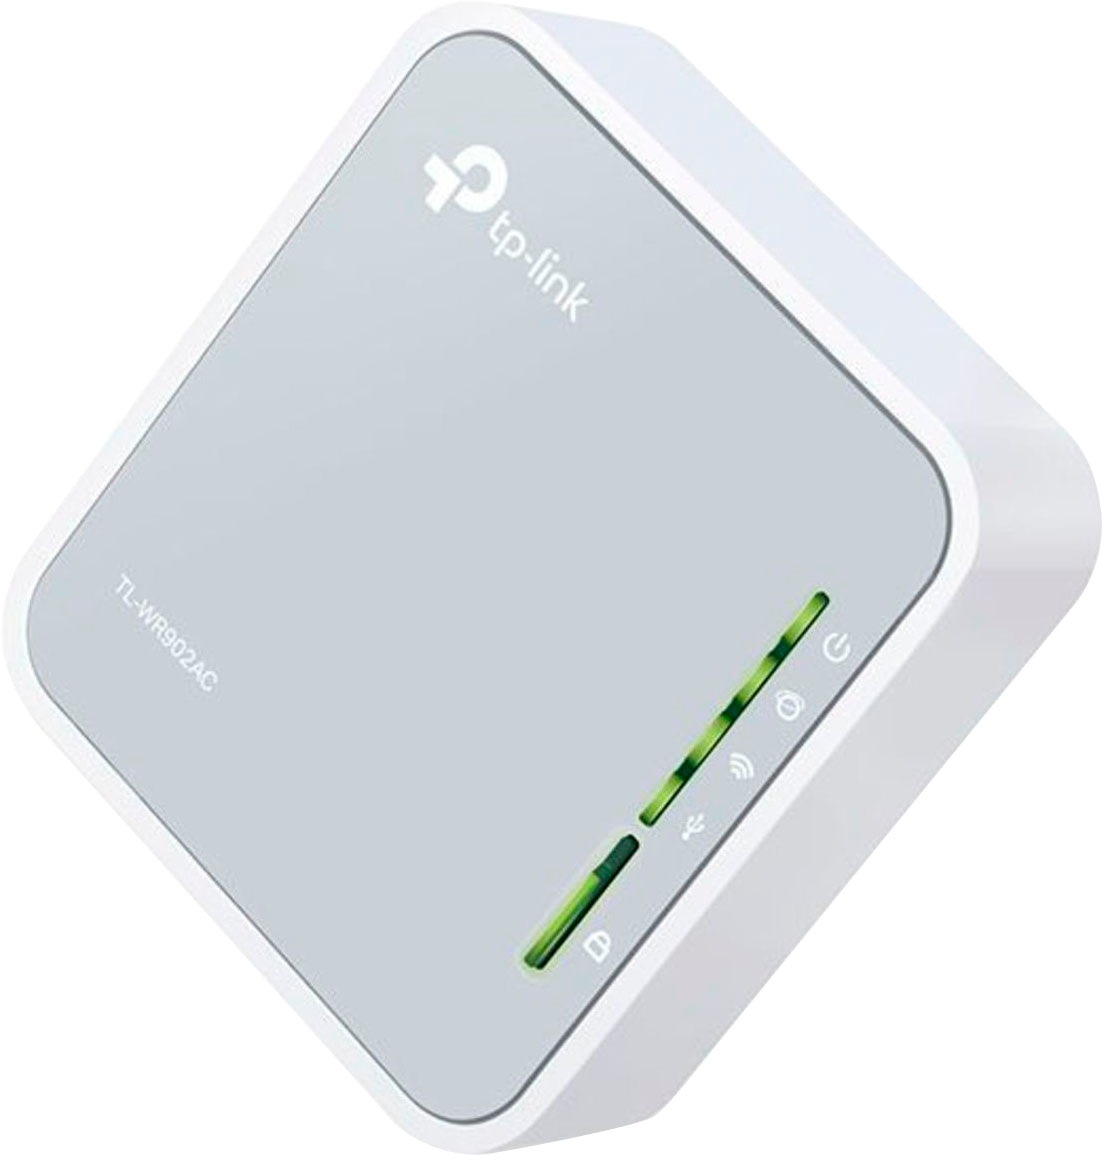 TP-Link Mobiler Router »TL-WR902AC AC750 Dual Band Wireless Router«